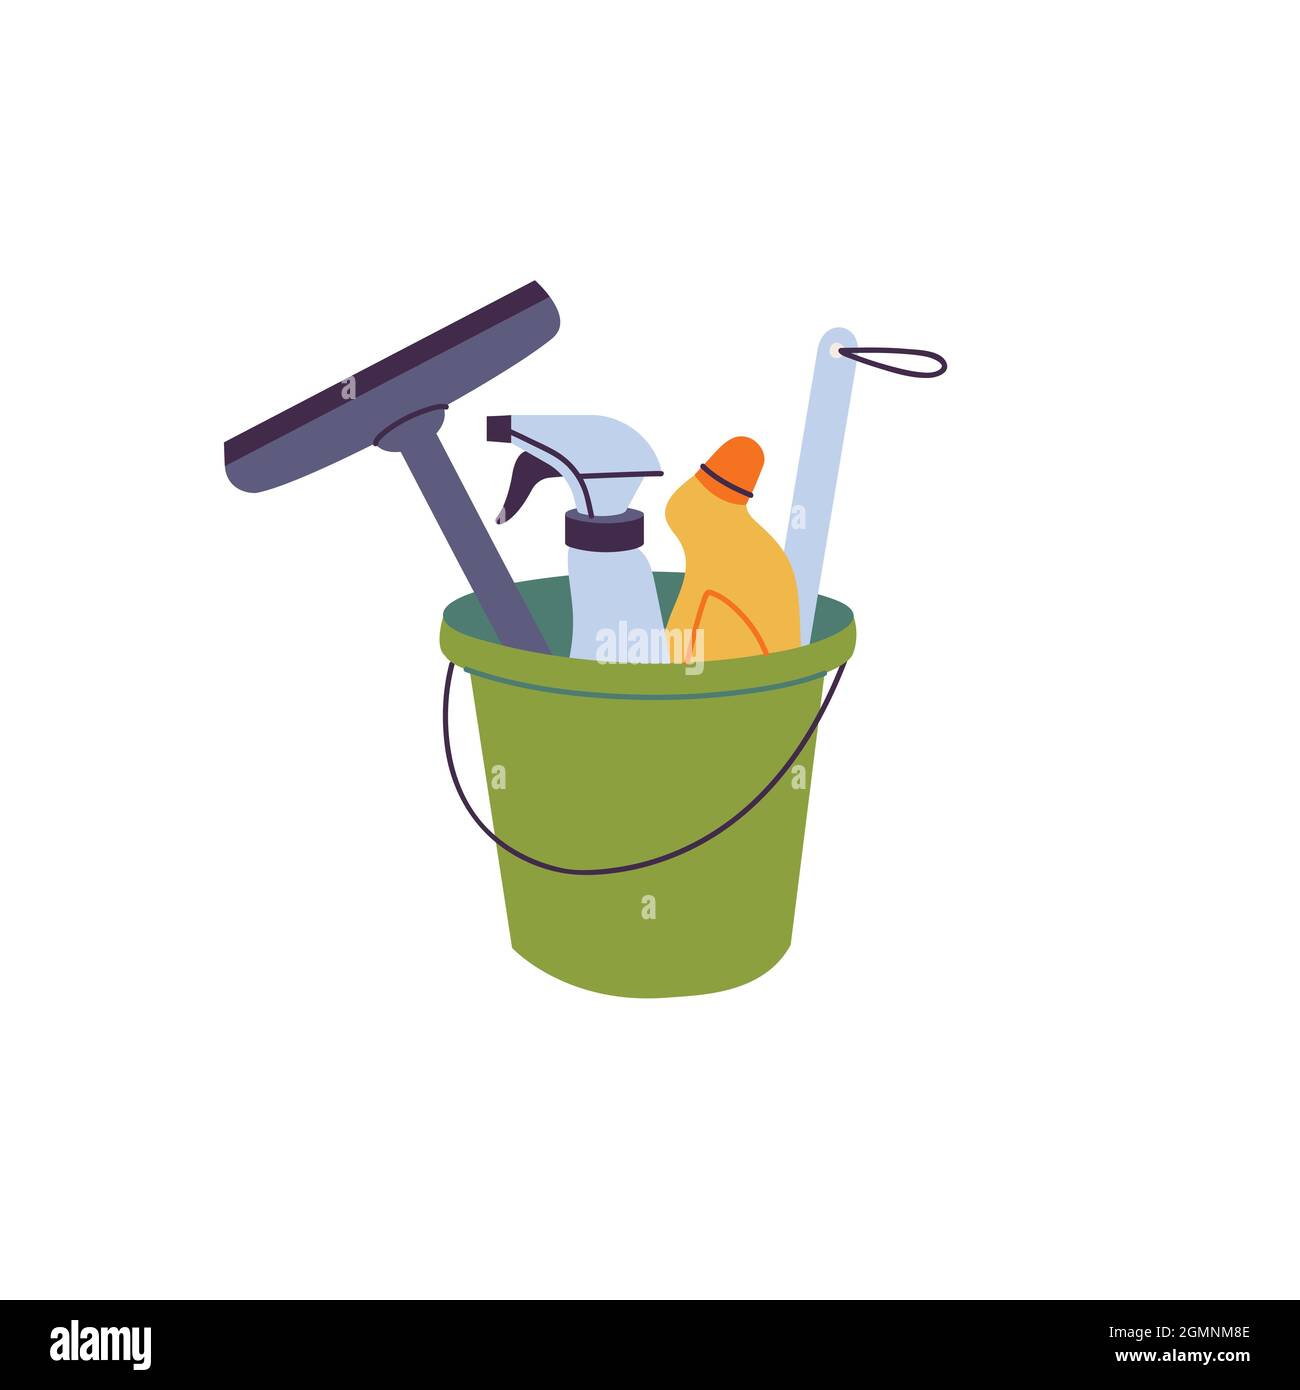 Set of cleaning equipment. House cleaning service tools cartoon